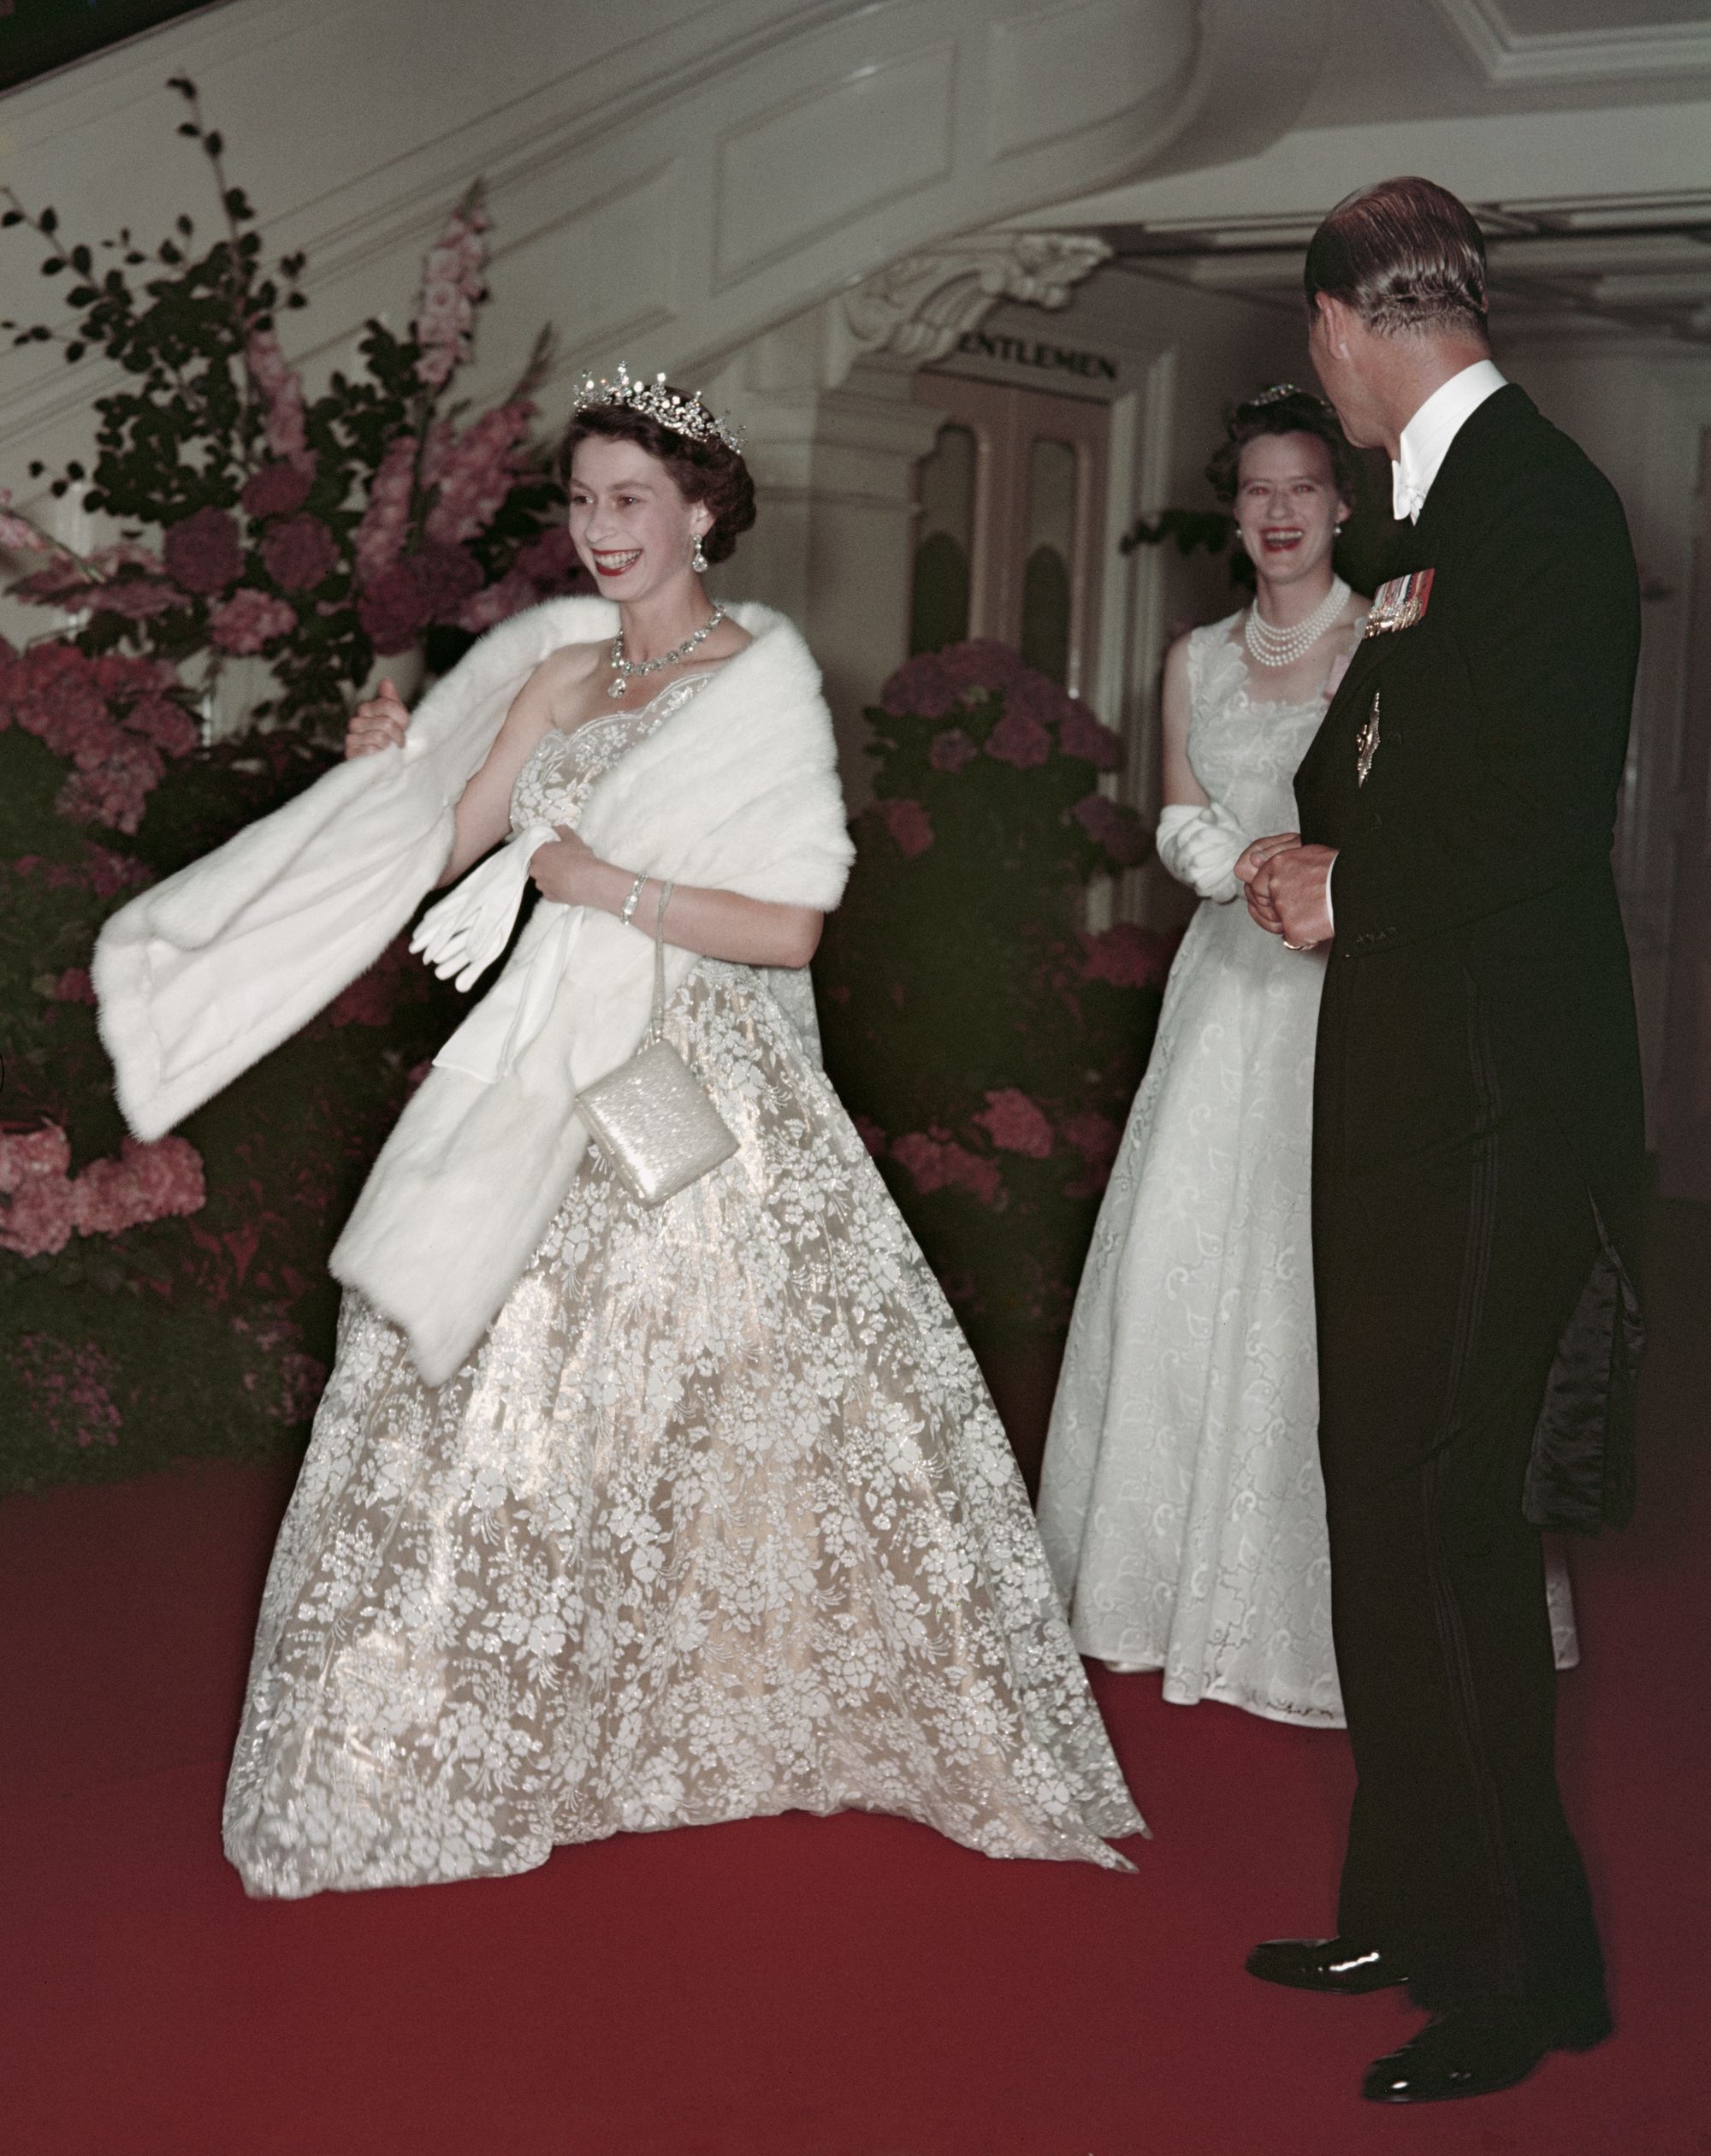 Pin by Anna Wilkins on history. | Royal dresses, Royalty dresses, Queen  costume